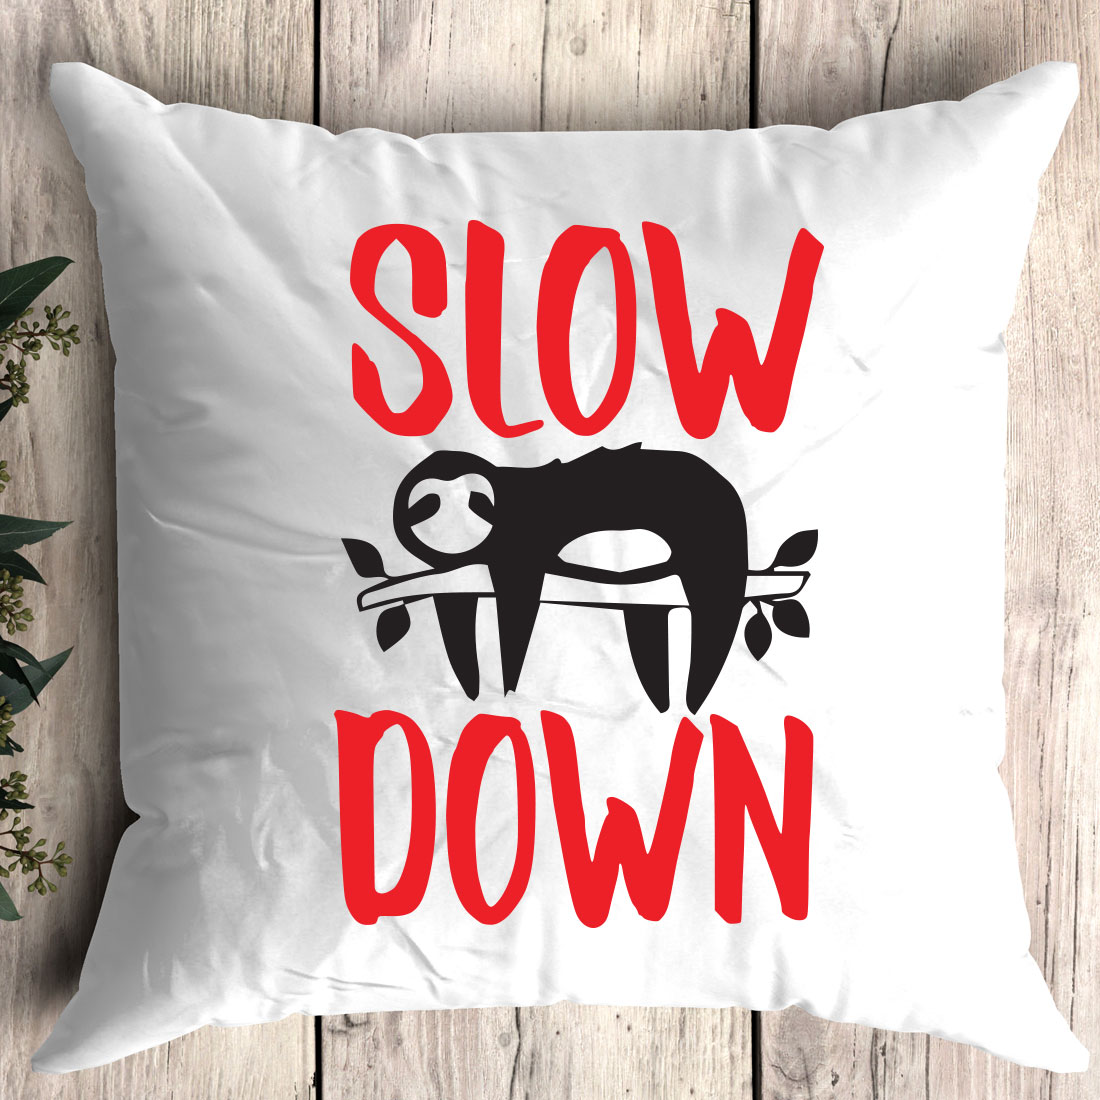 Pillow that says slow down on it.